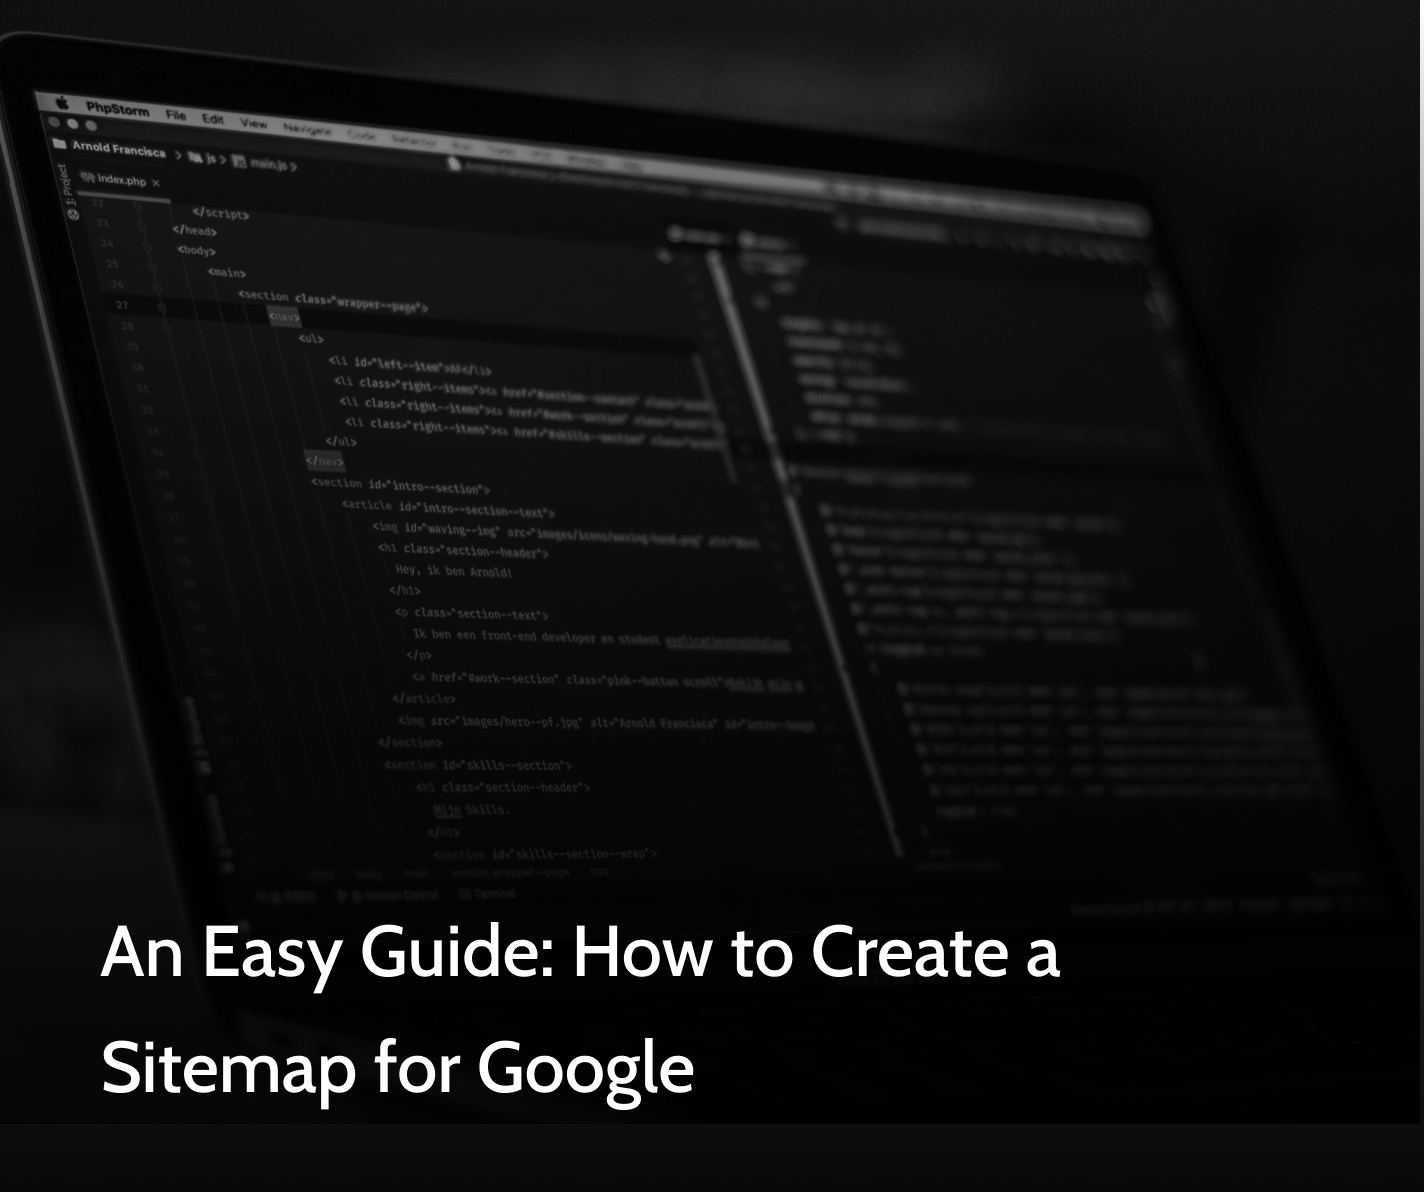 An Easy Guide: How to Create a Sitemap for Google